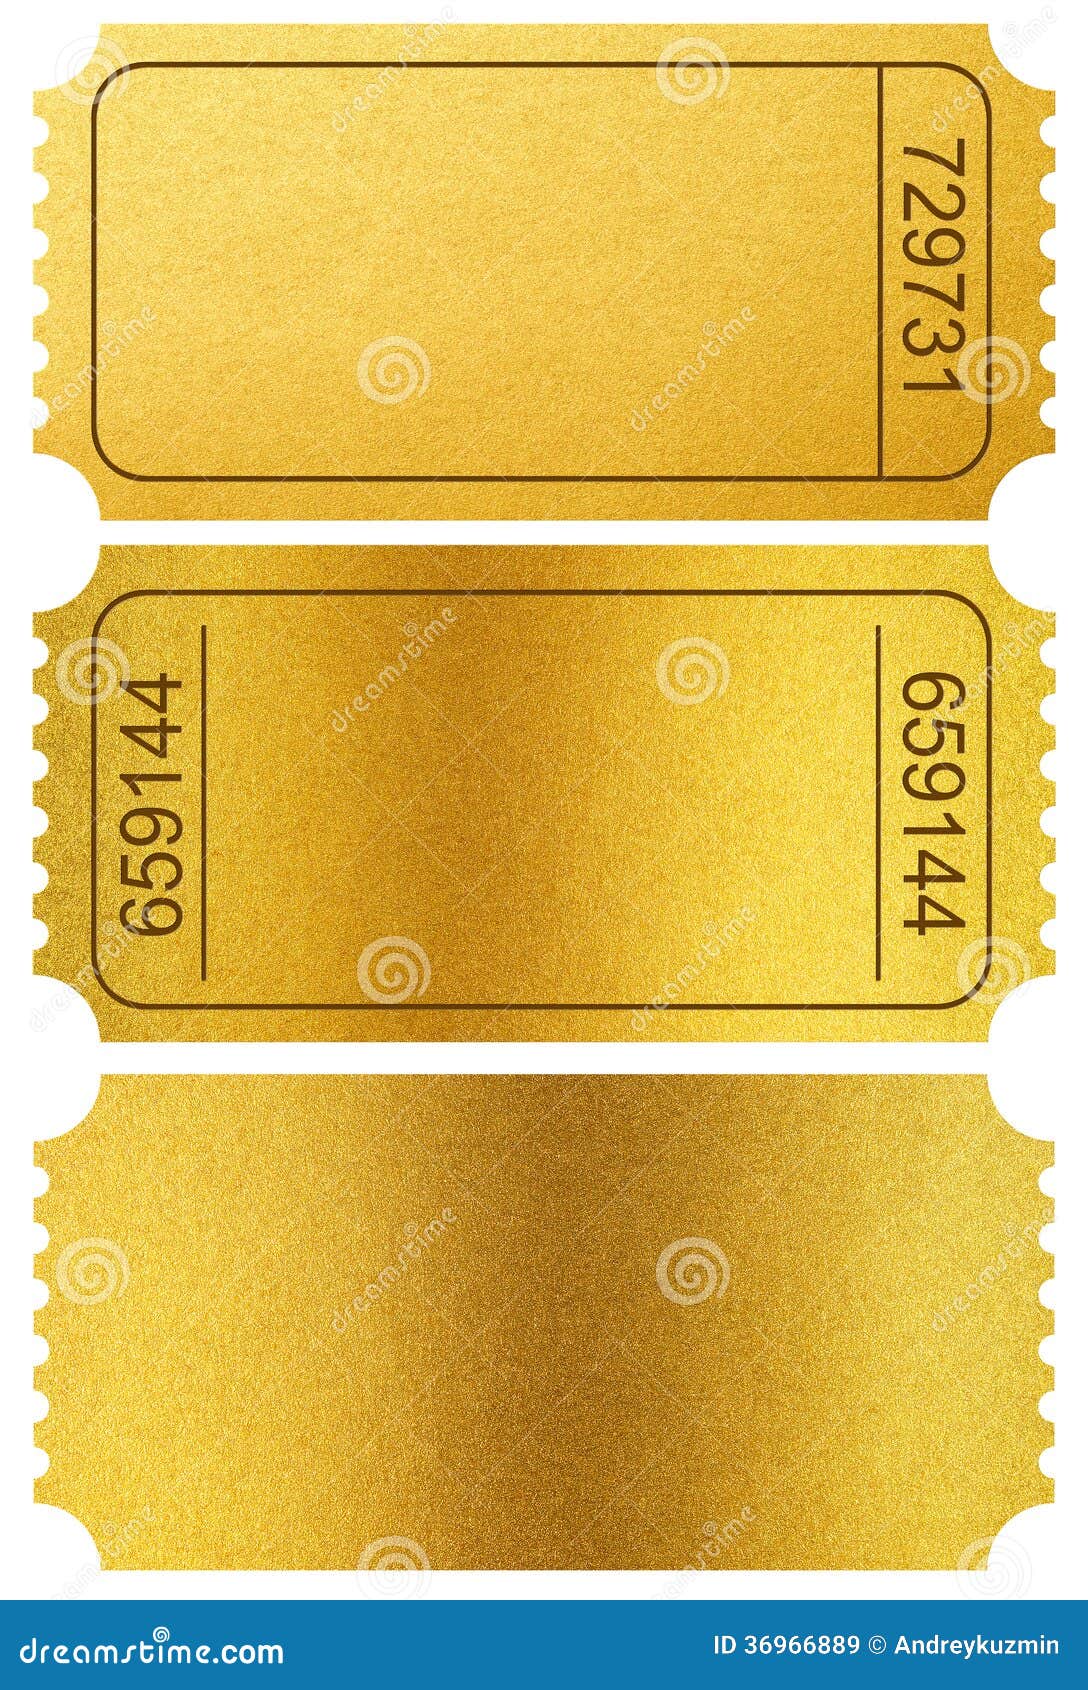 gold tickets stubs  on white with clipping path